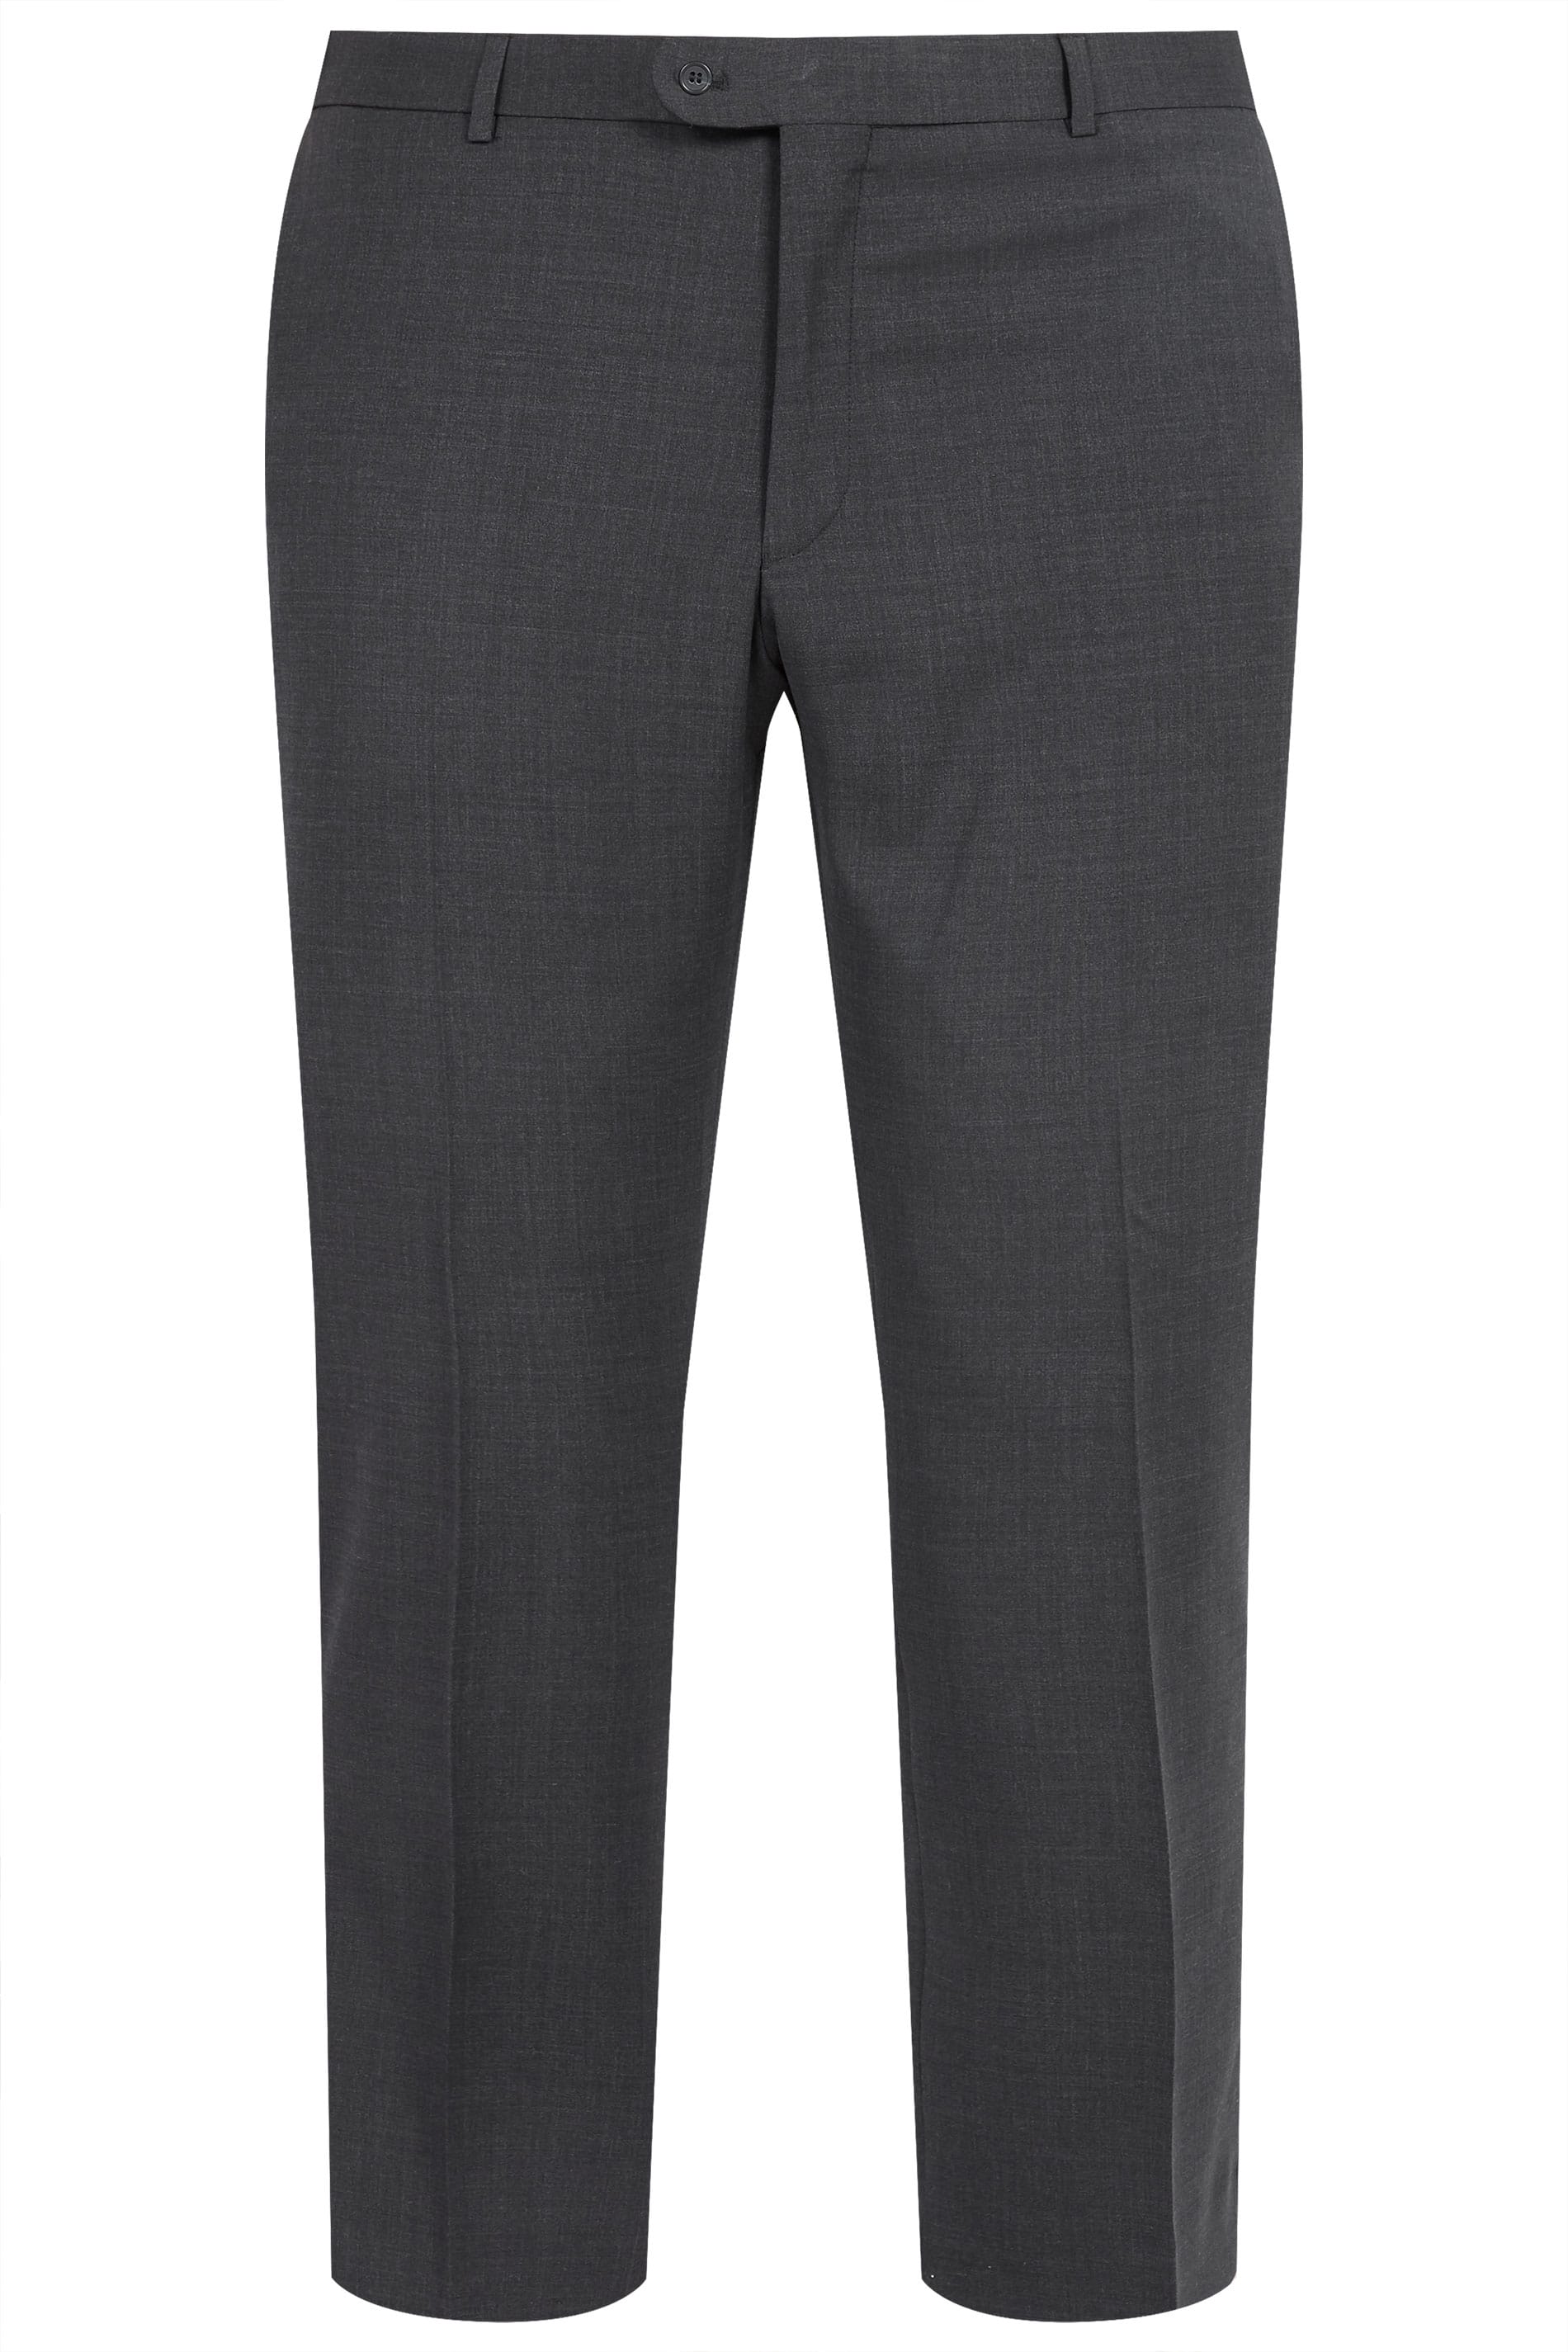 BadRhino Charcoal Suit Trousers | Sizes 38